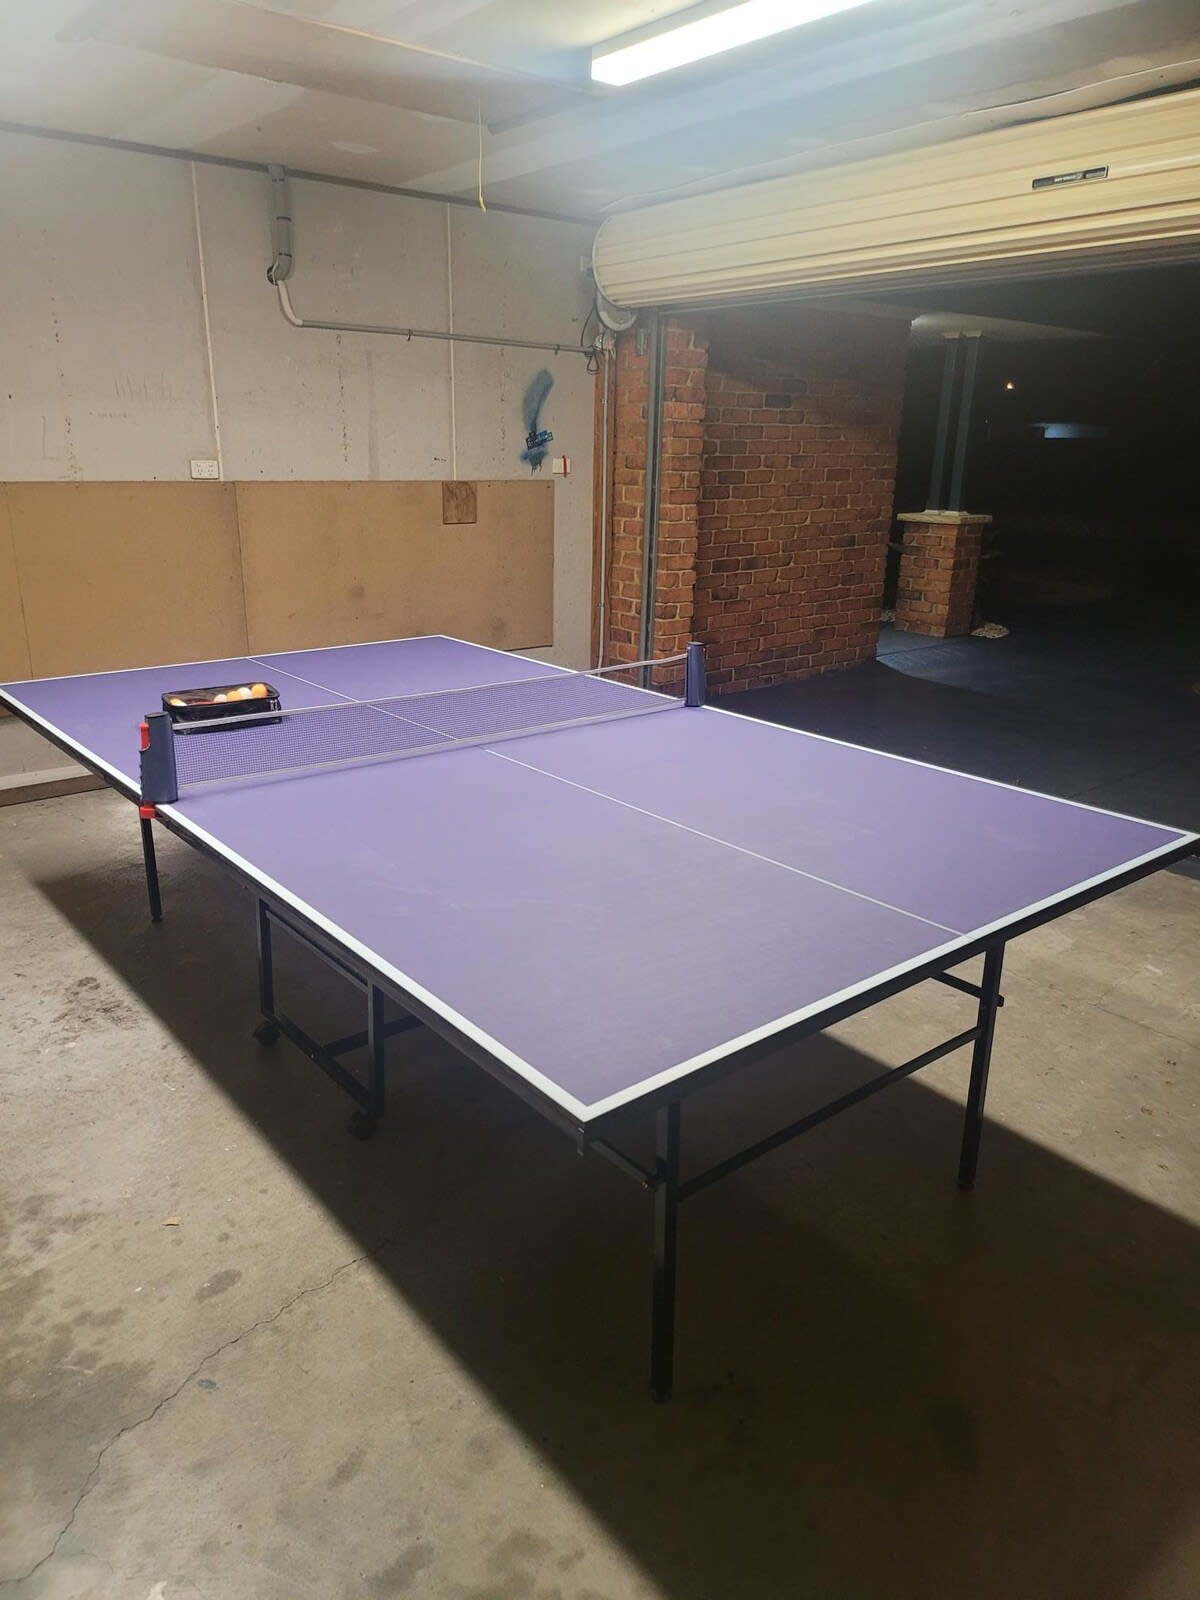 Table Tennis in the Garage